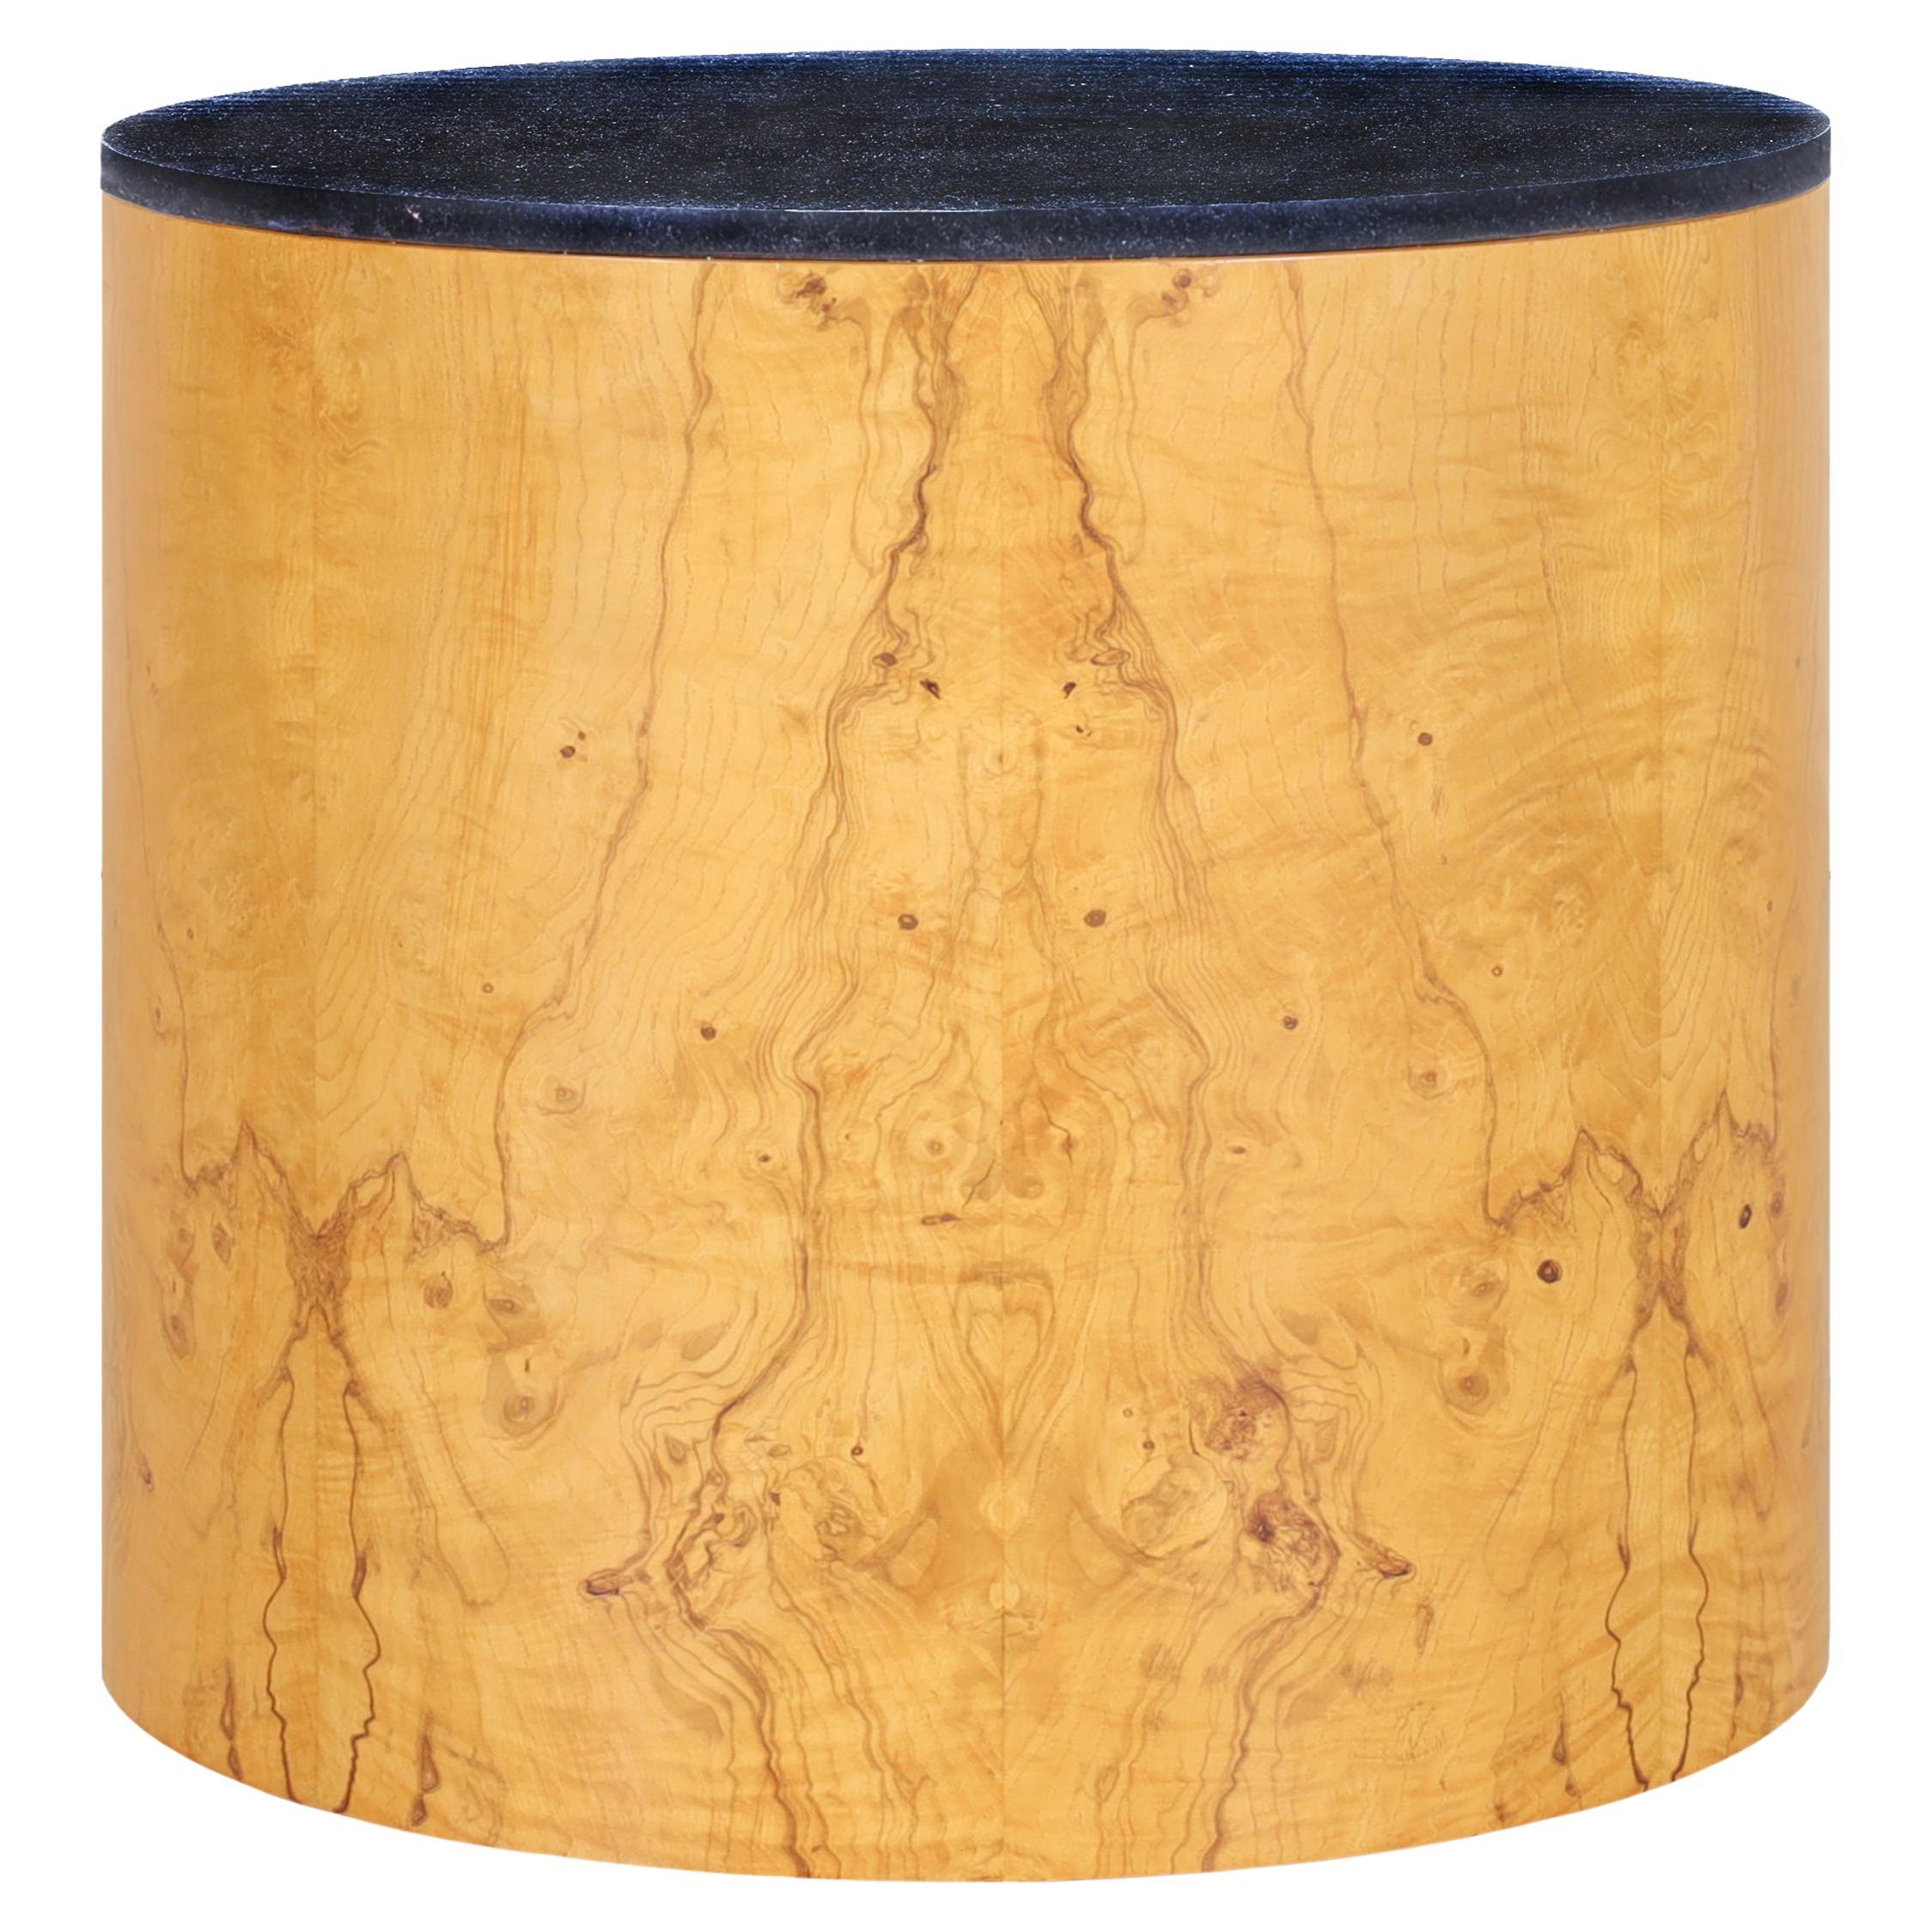 Mid-Century Modern Burl Wood and Granite "Drum" Side Table by Paul Mayen For Sale